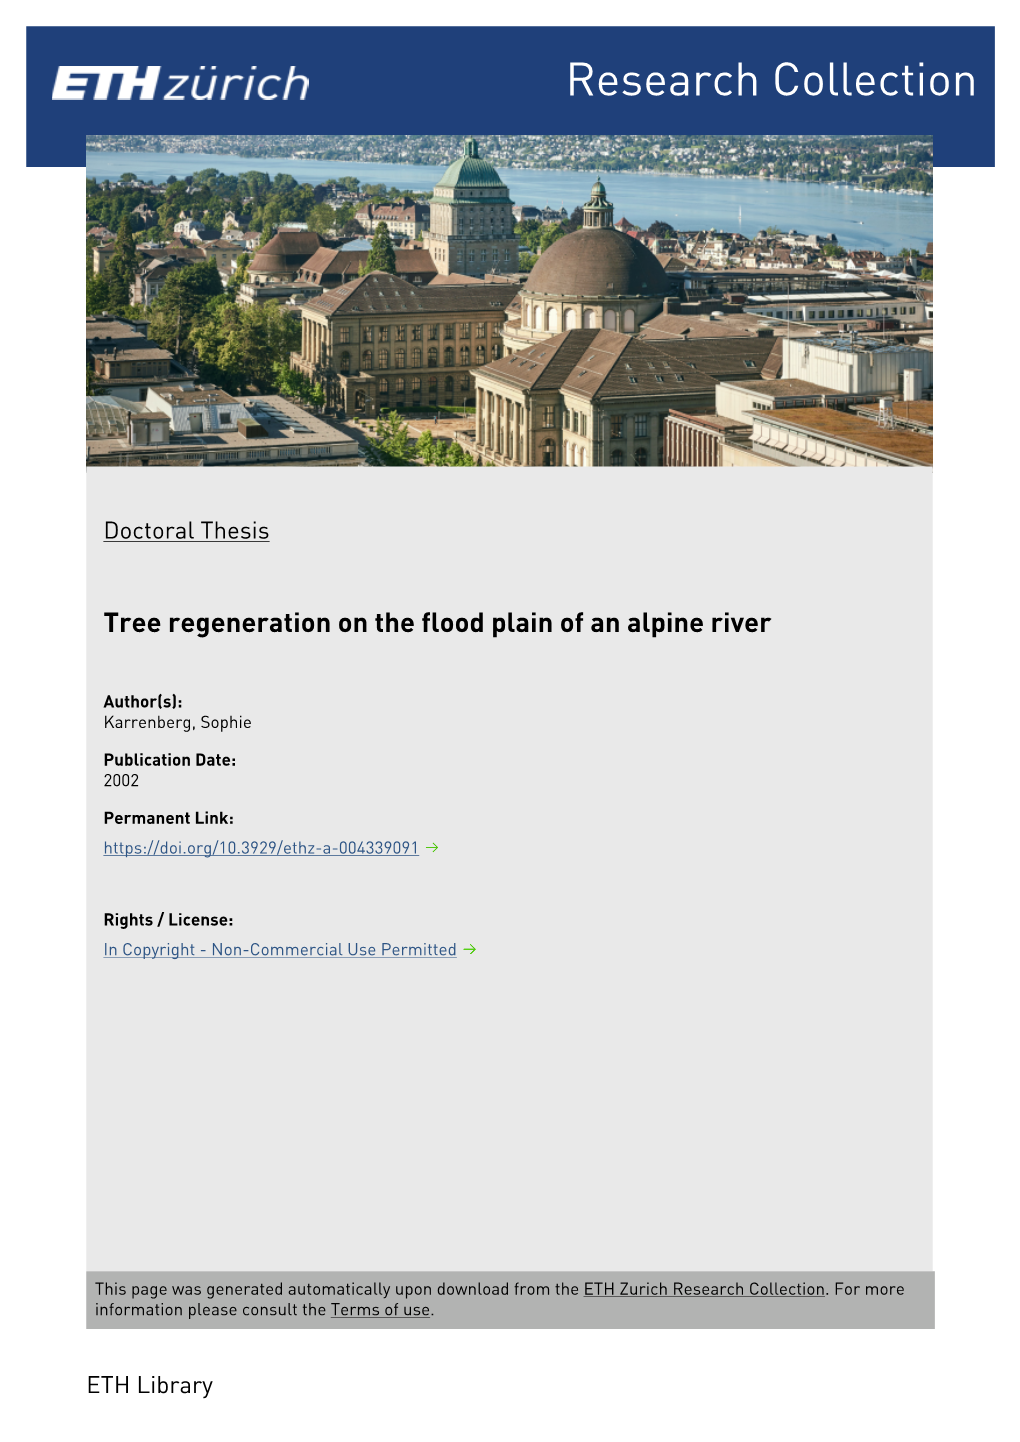 Download from the ETH Zurich Research Collection